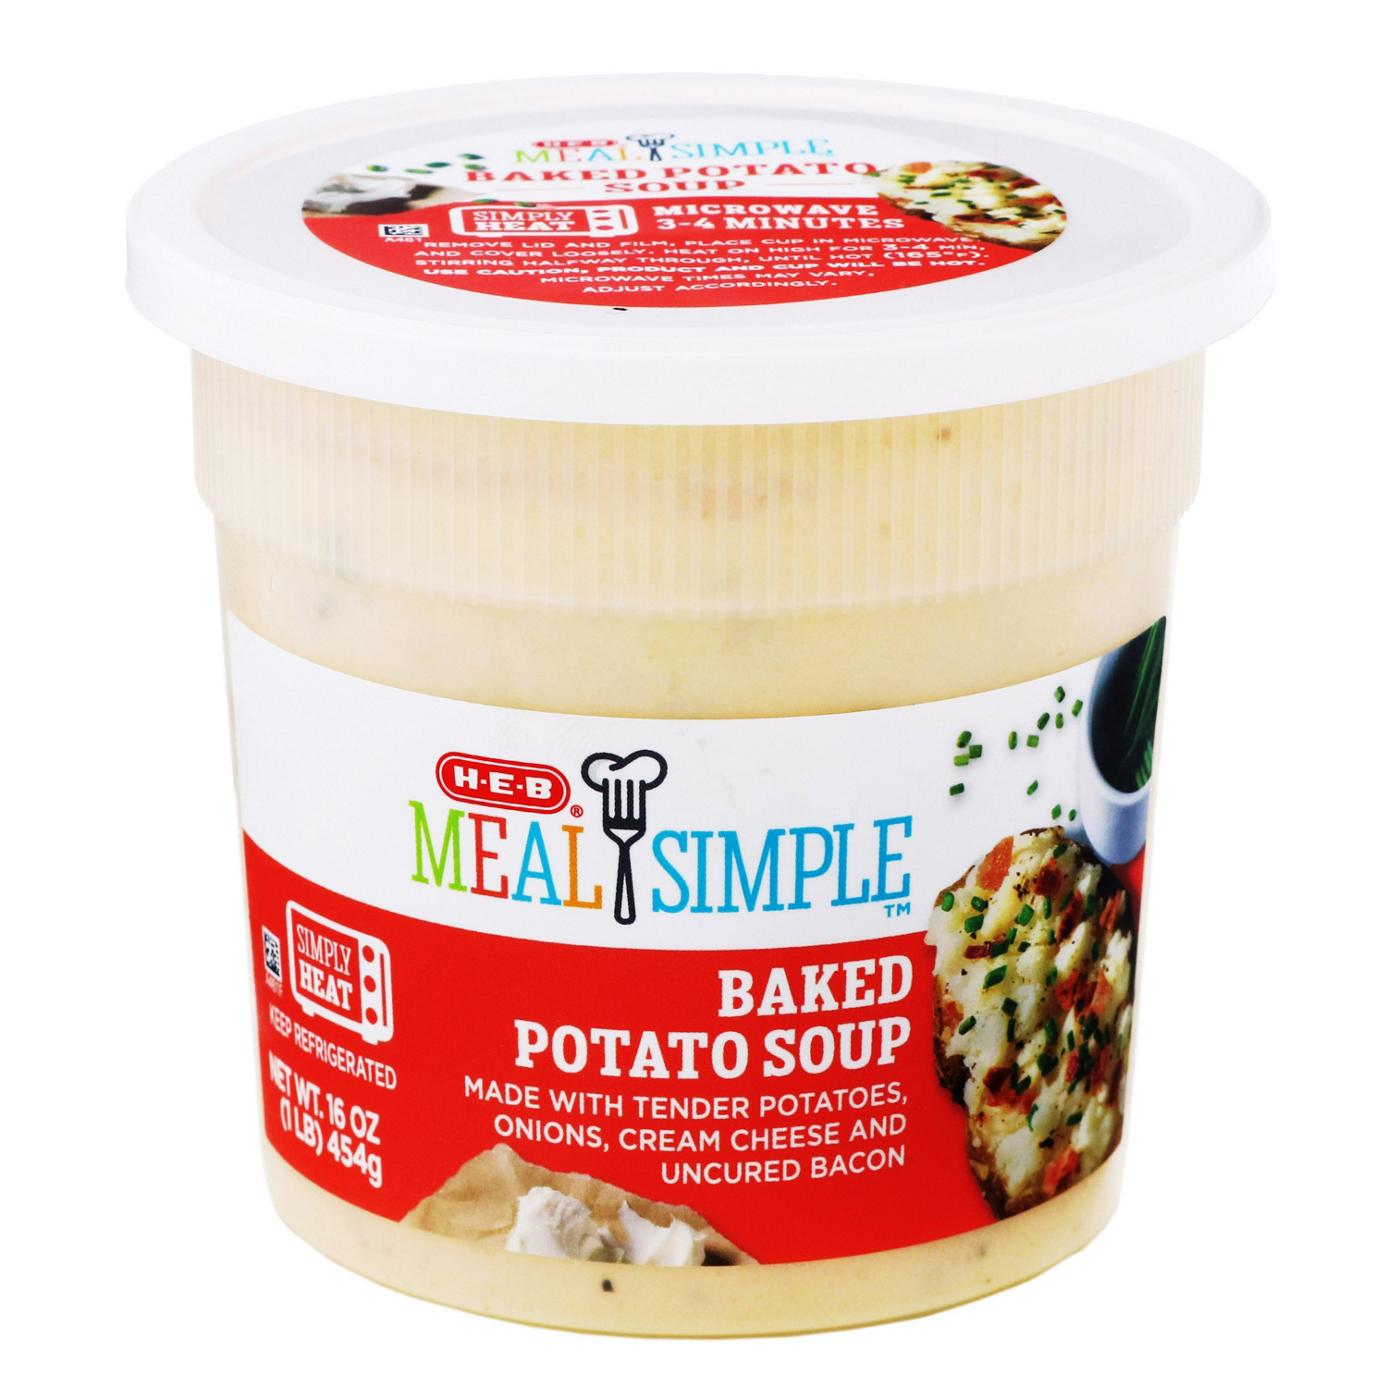 Meal Simple by H-E-B Baked Potato Soup; image 2 of 3